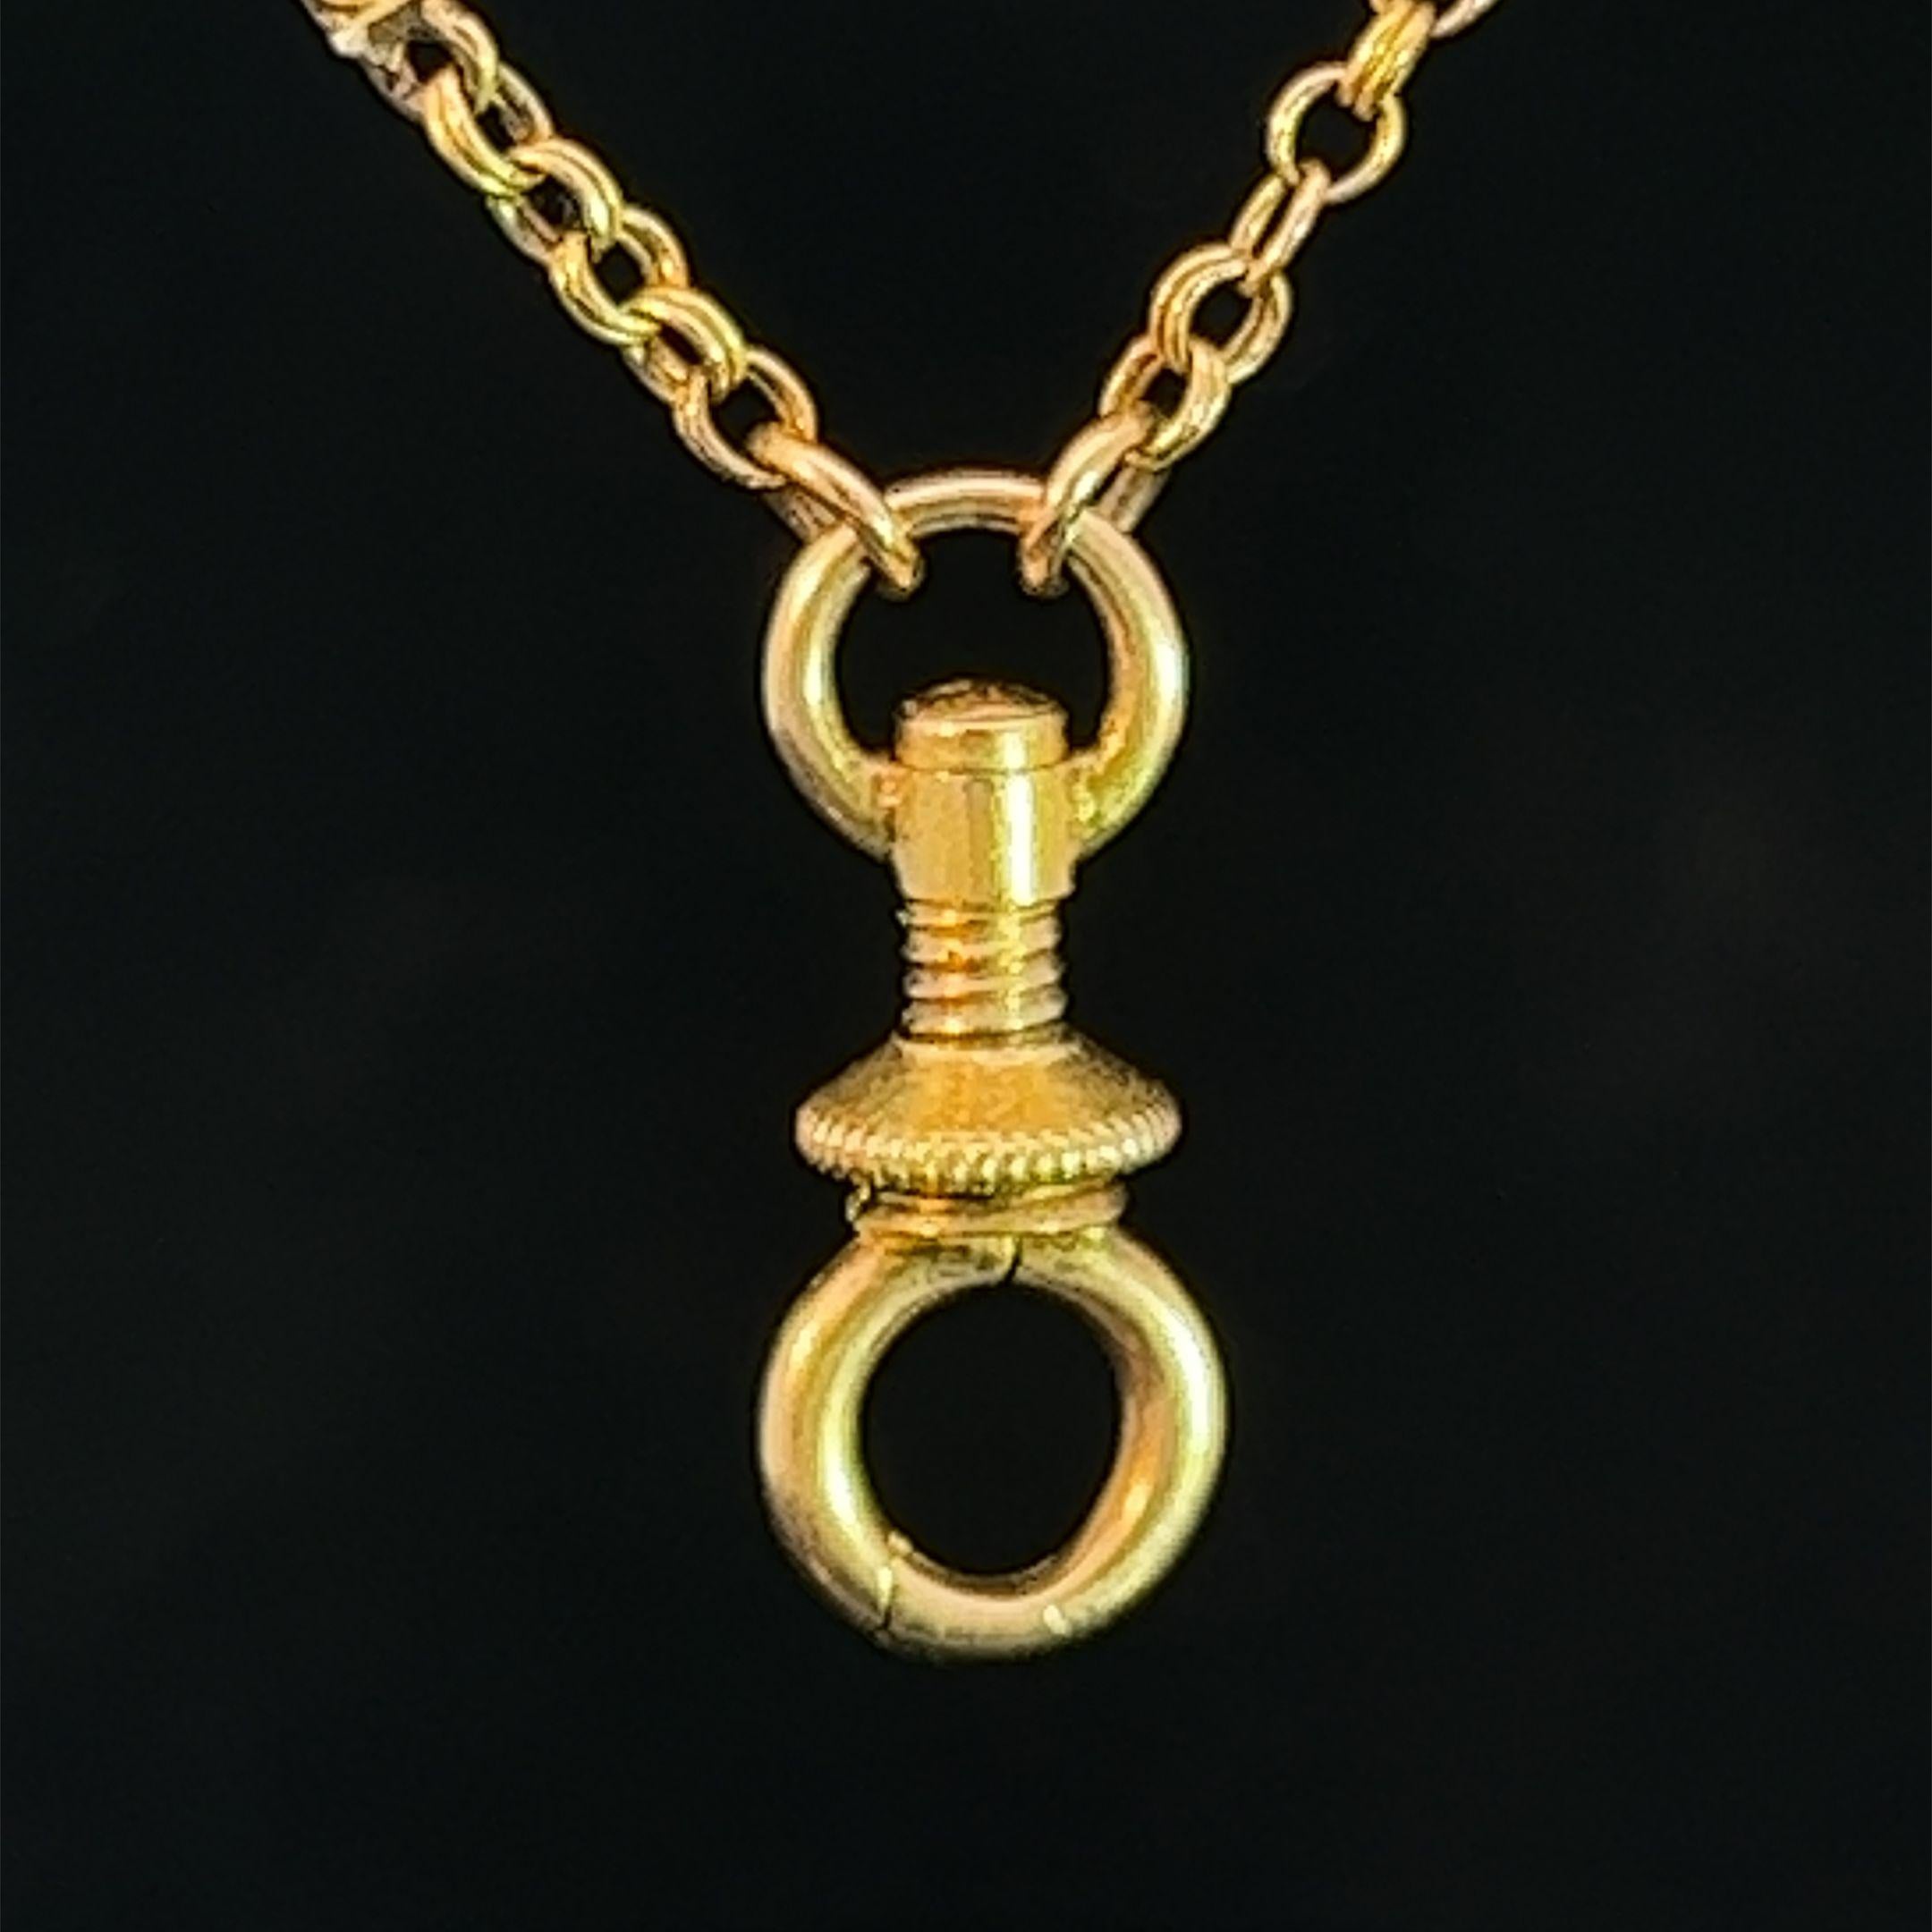 Antique Victorian Long 18k yellow Gold Guard Chain Circa 1890 For Sale 1